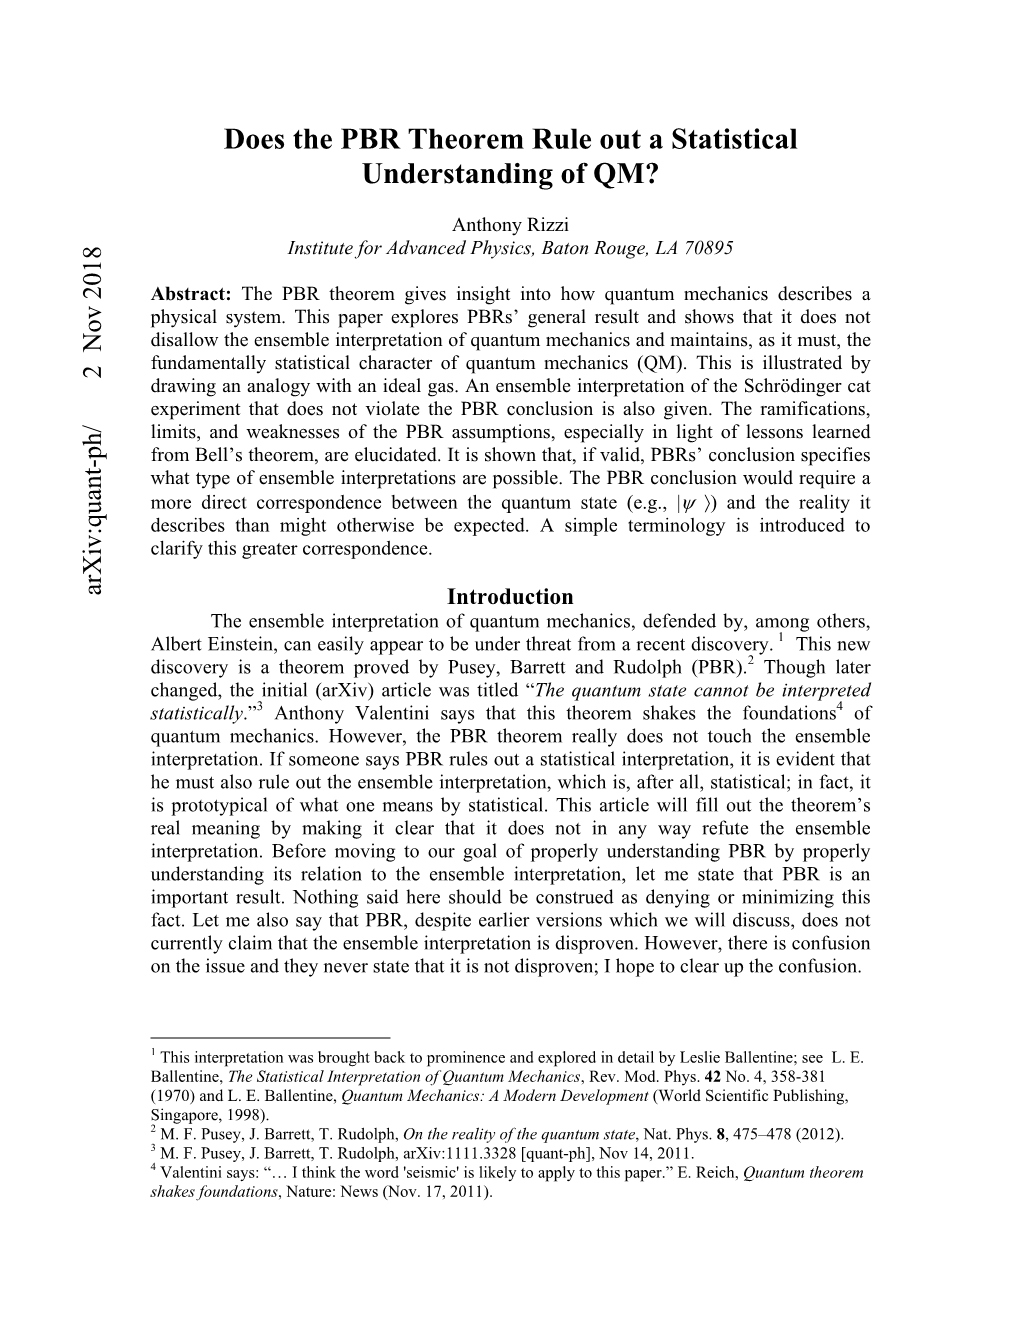 Does the PBR Theorem Rule out a Statistical Understanding of QM?